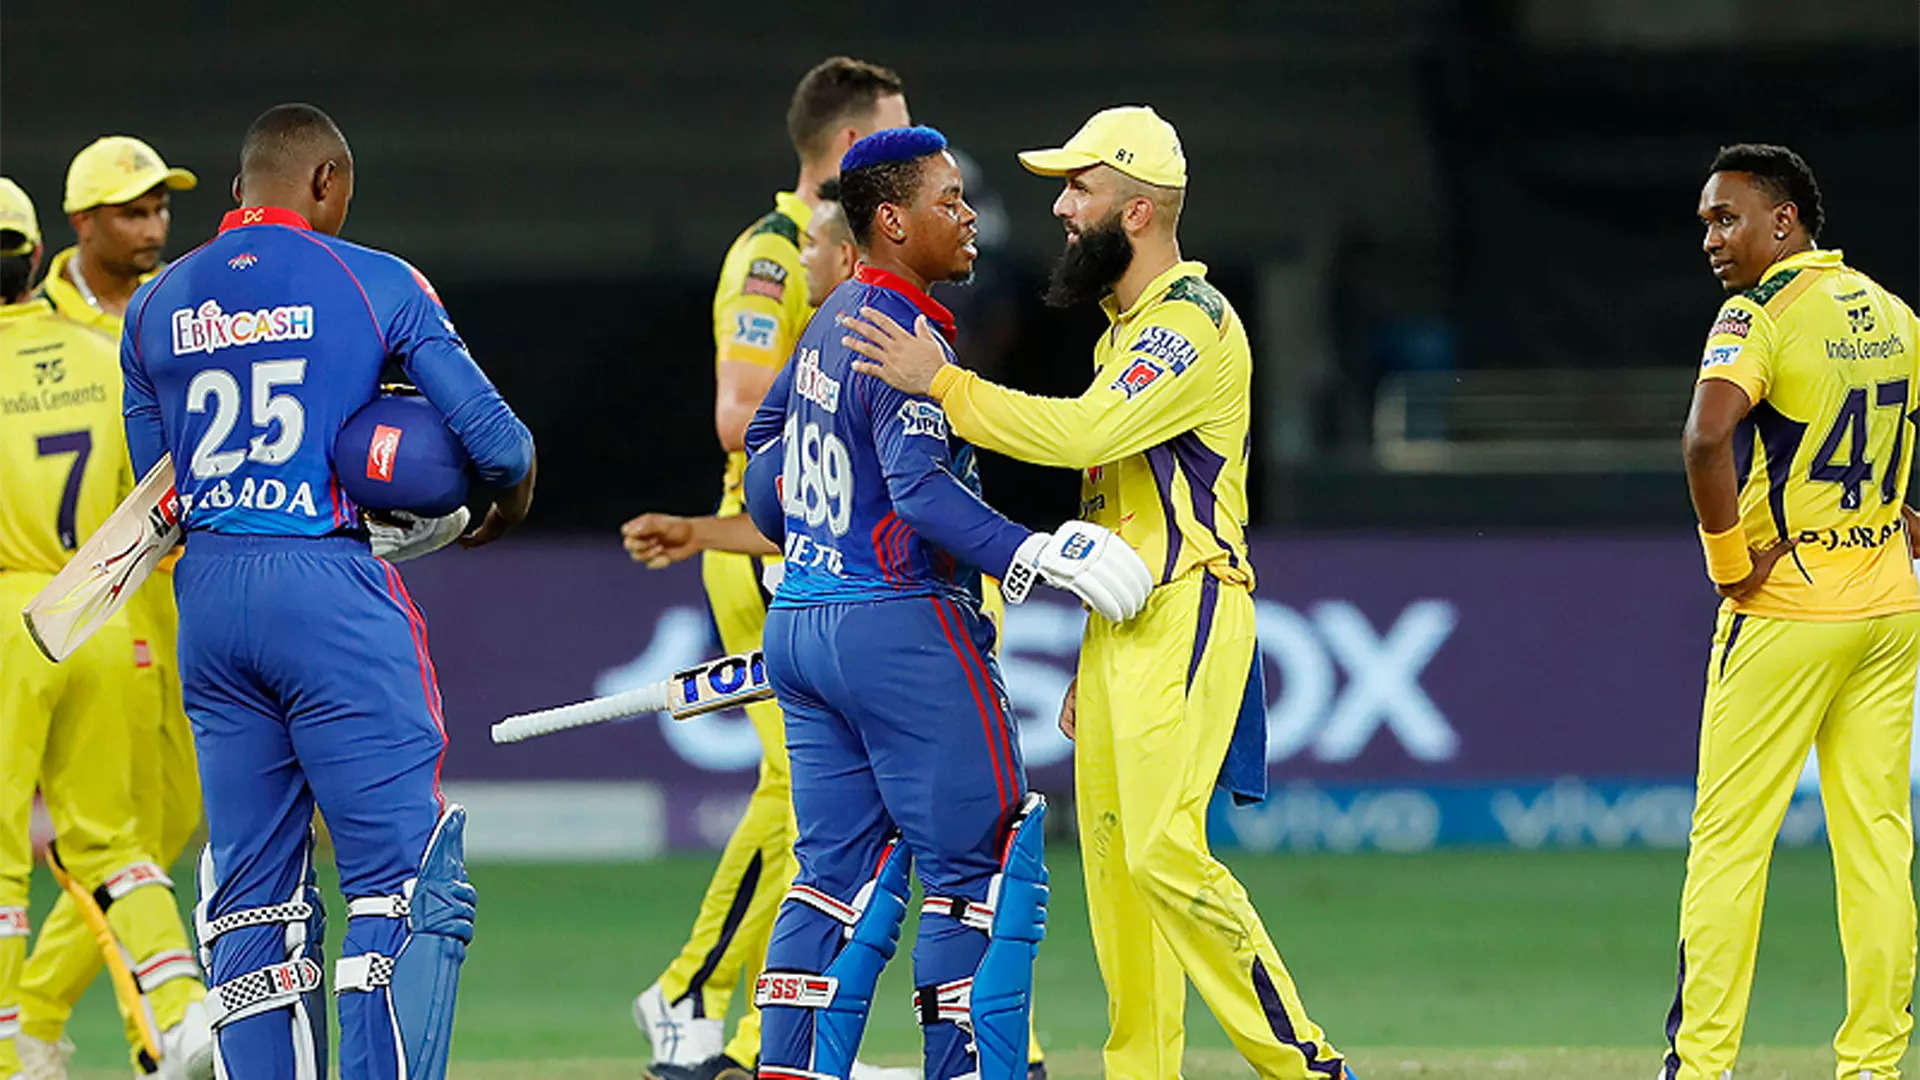 IN PICS: How Delhi beat Chennai to go top of the IPL points table